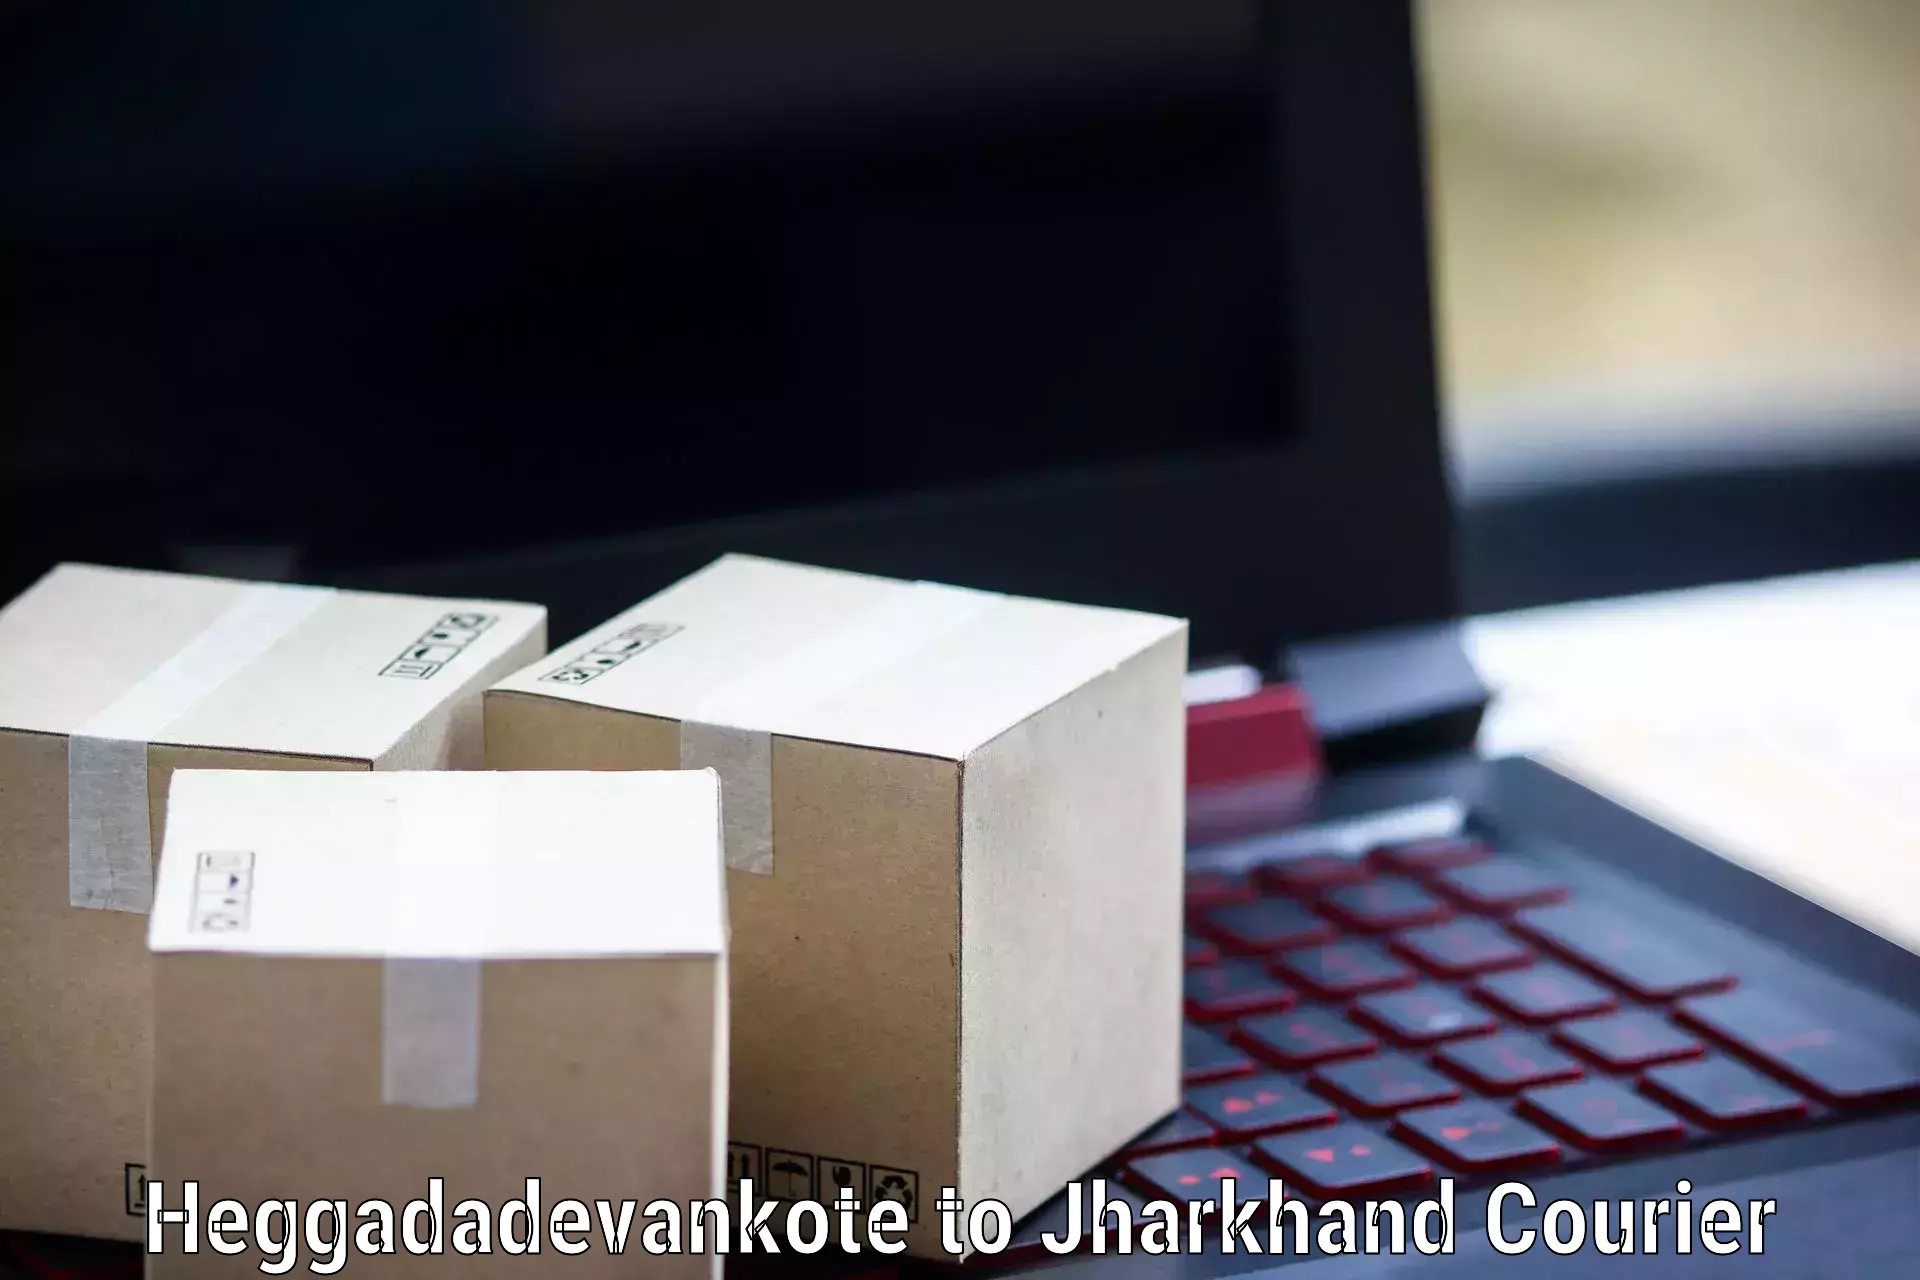 Personal parcel delivery in Heggadadevankote to IIIT Ranchi